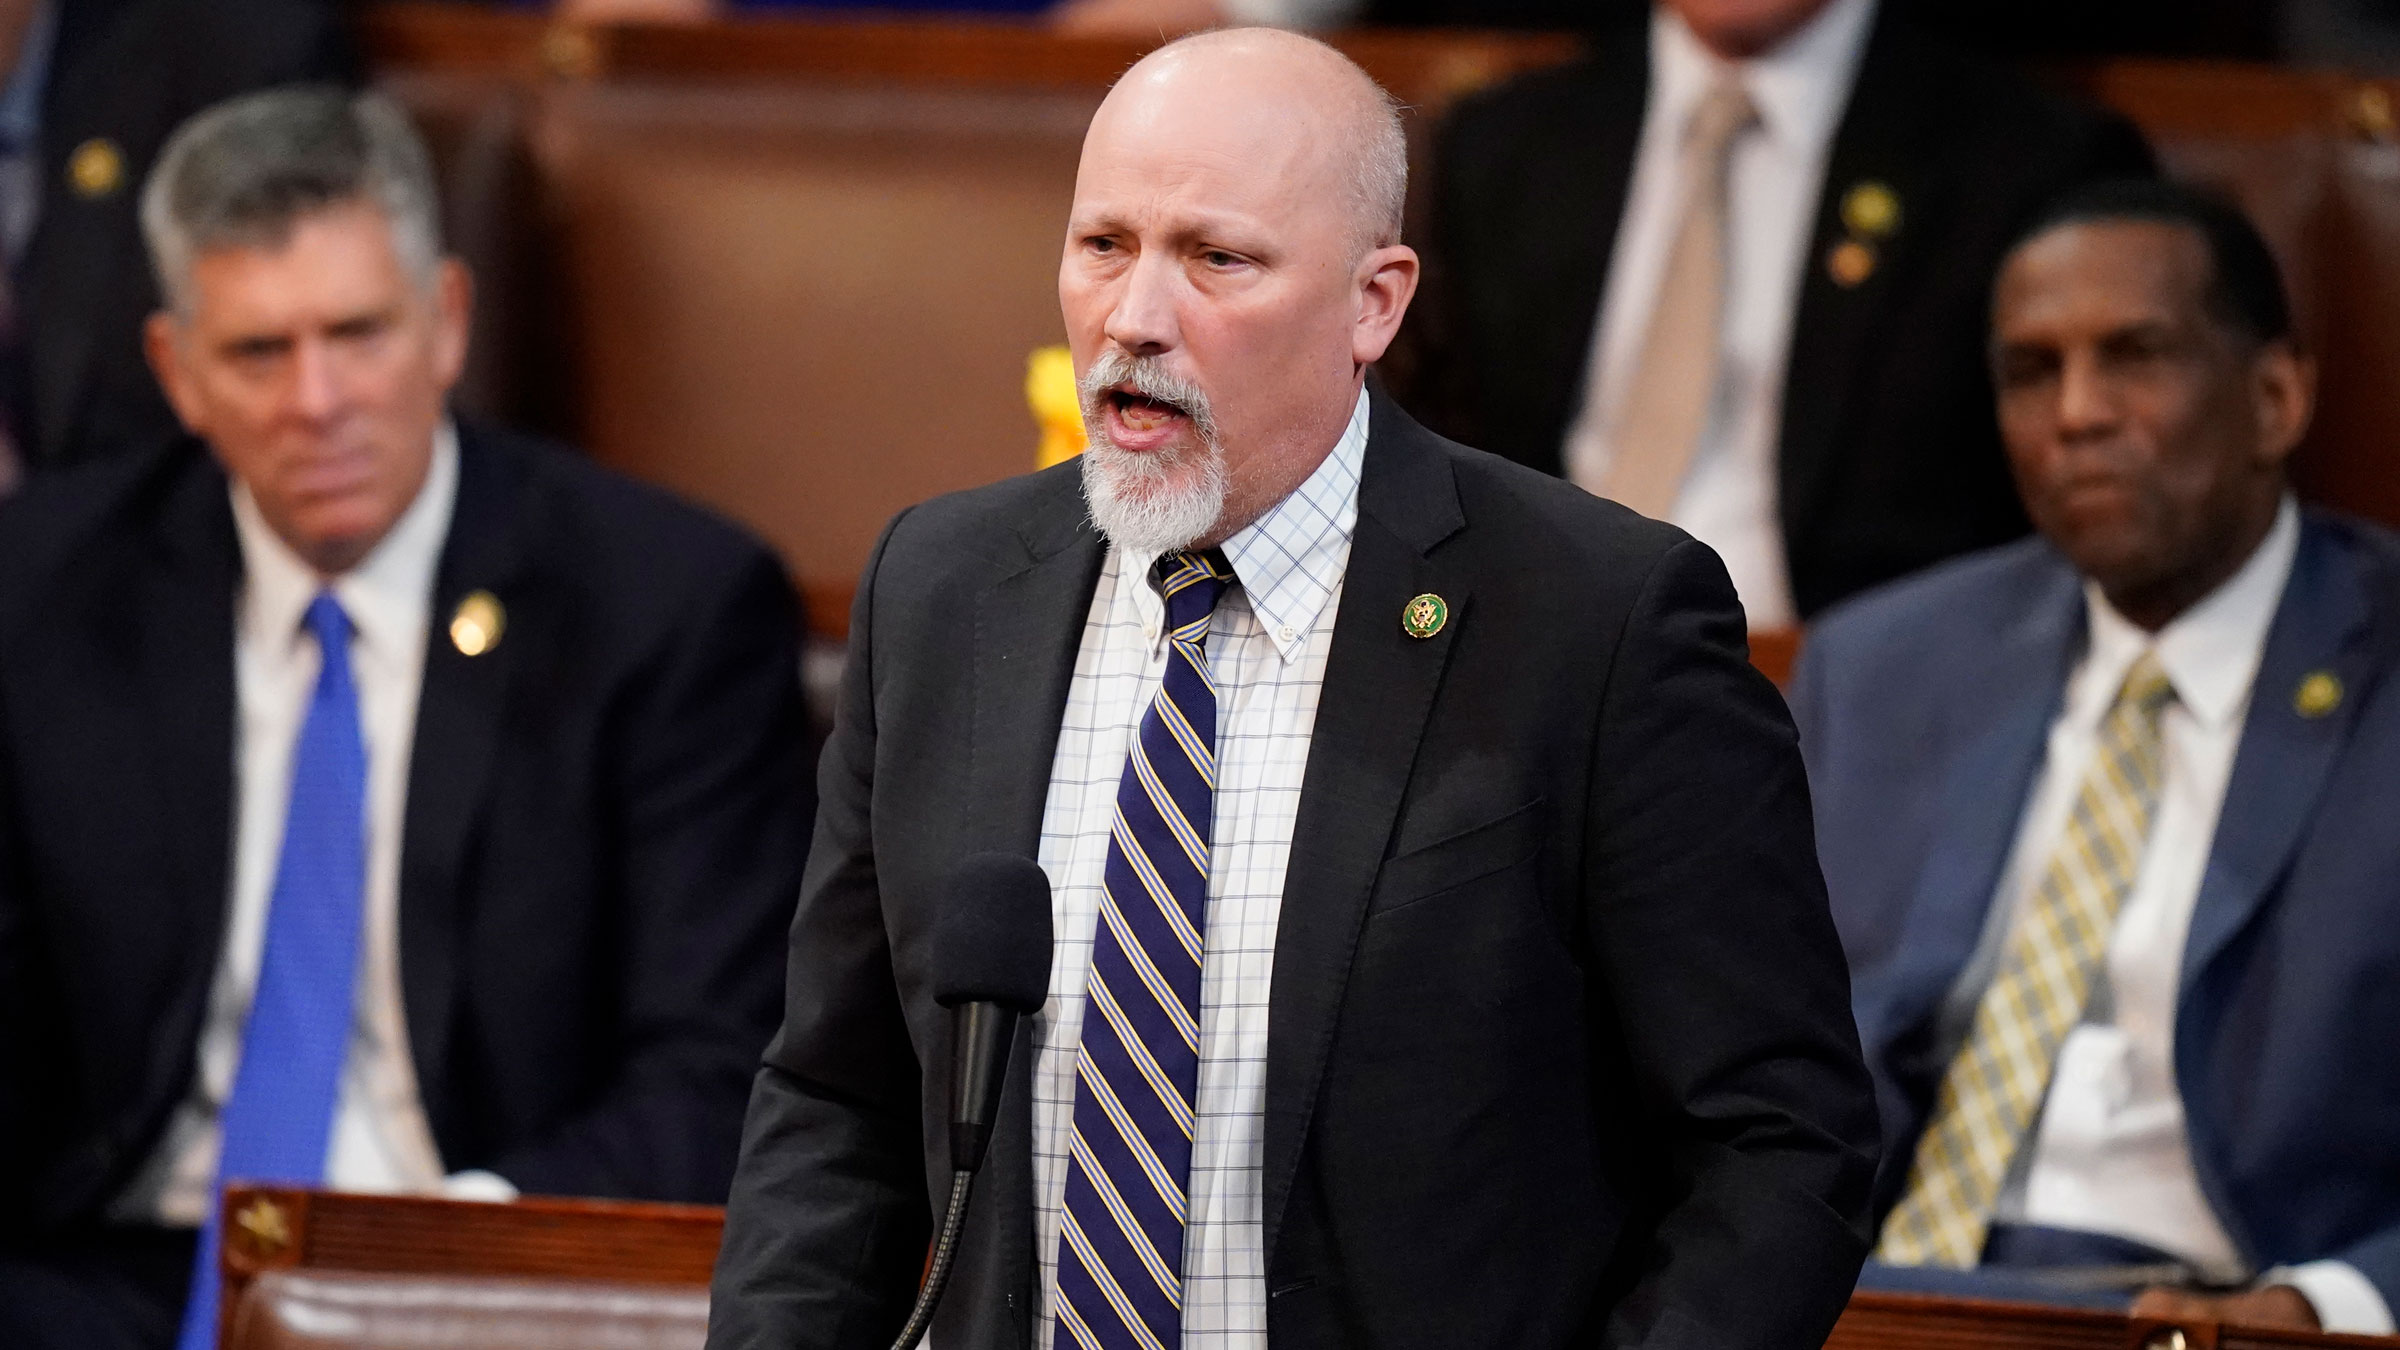 US Rep. Chip Roy, a Republican from Texas, nominated Rep. Byron Donalds for the speakership.